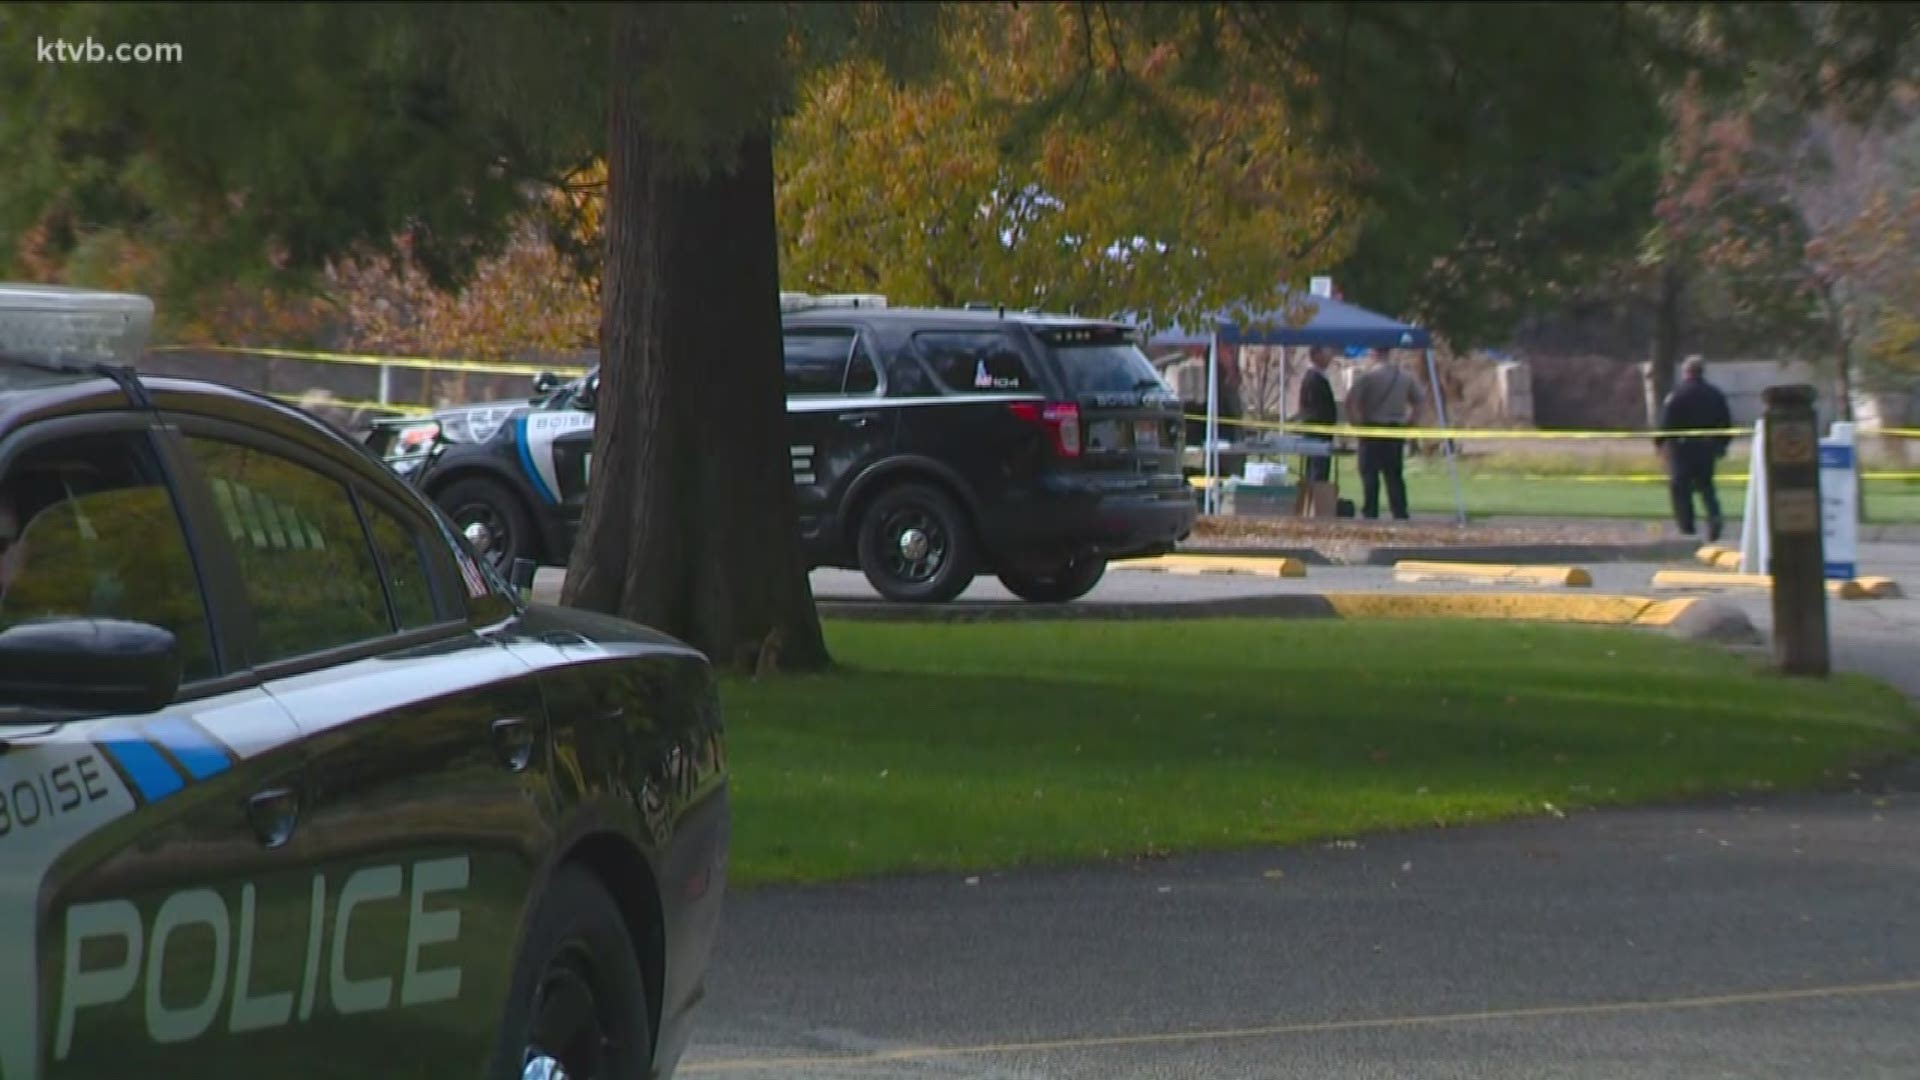 Boise Police found the body after responding to an 8:16 a.m. call on Thursday morning.